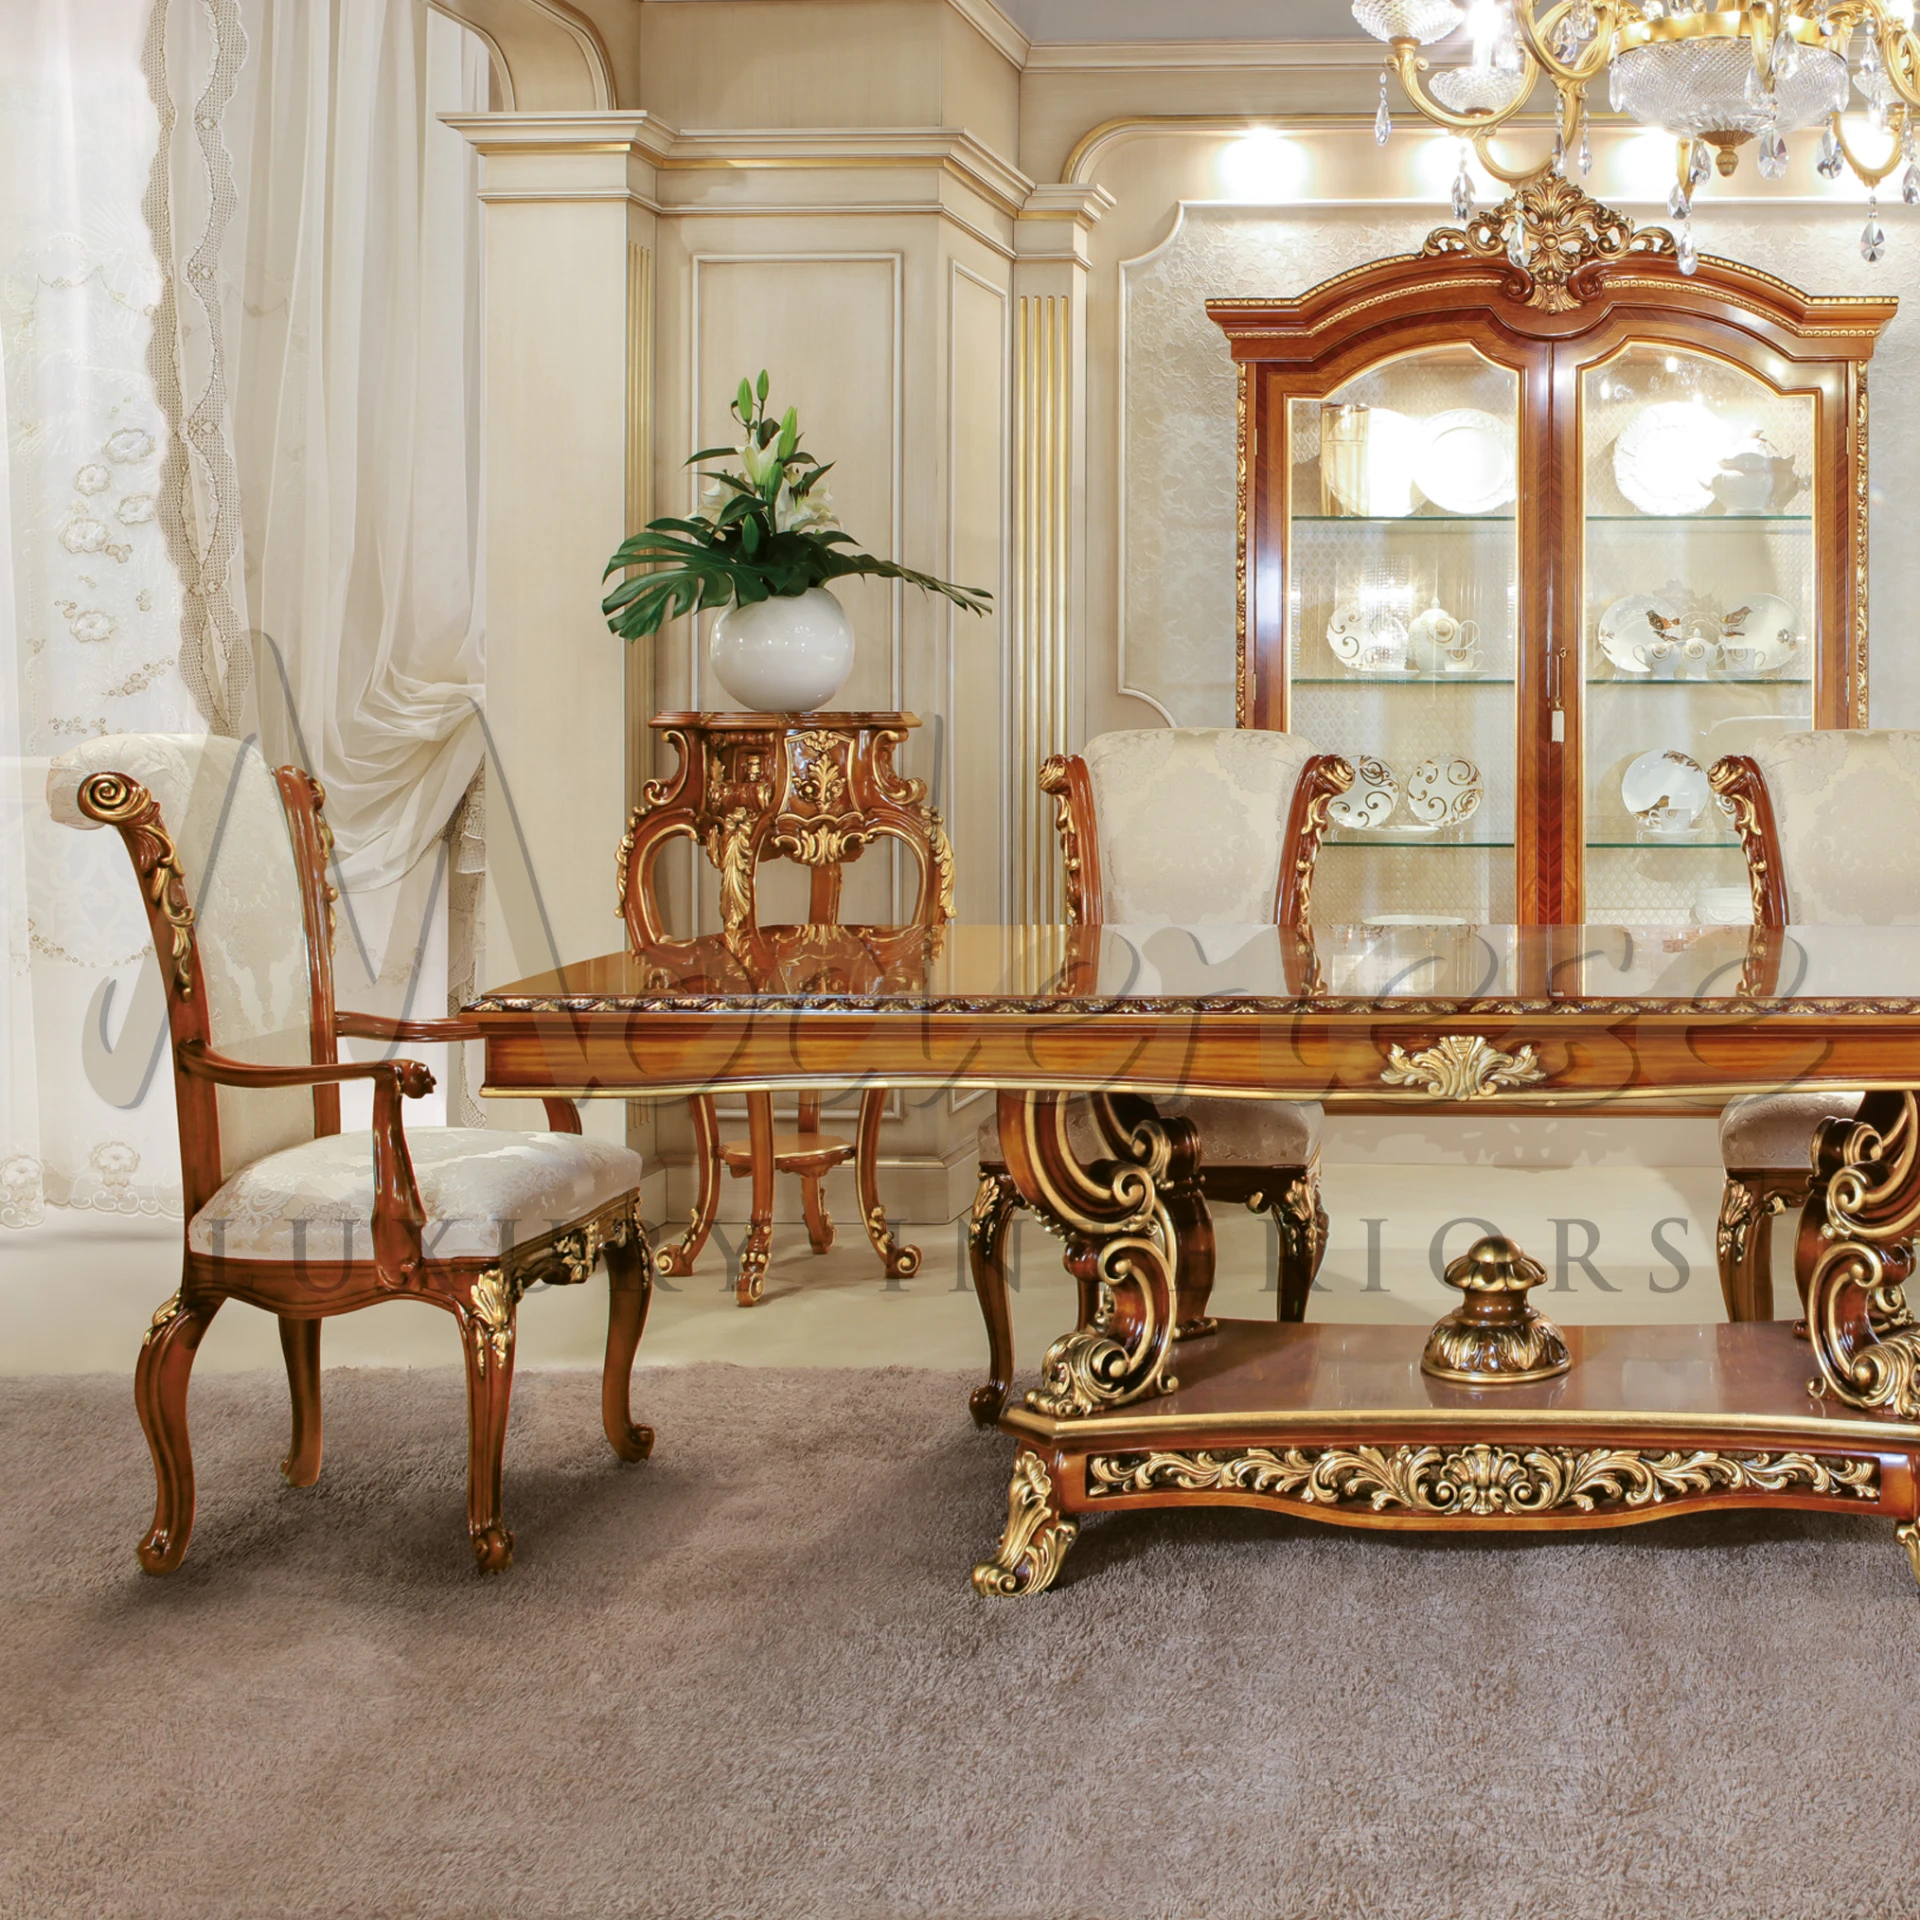 Luxurious dining room with a crystal chandelier and ornate furniture by Modenese Luxury Furniture.